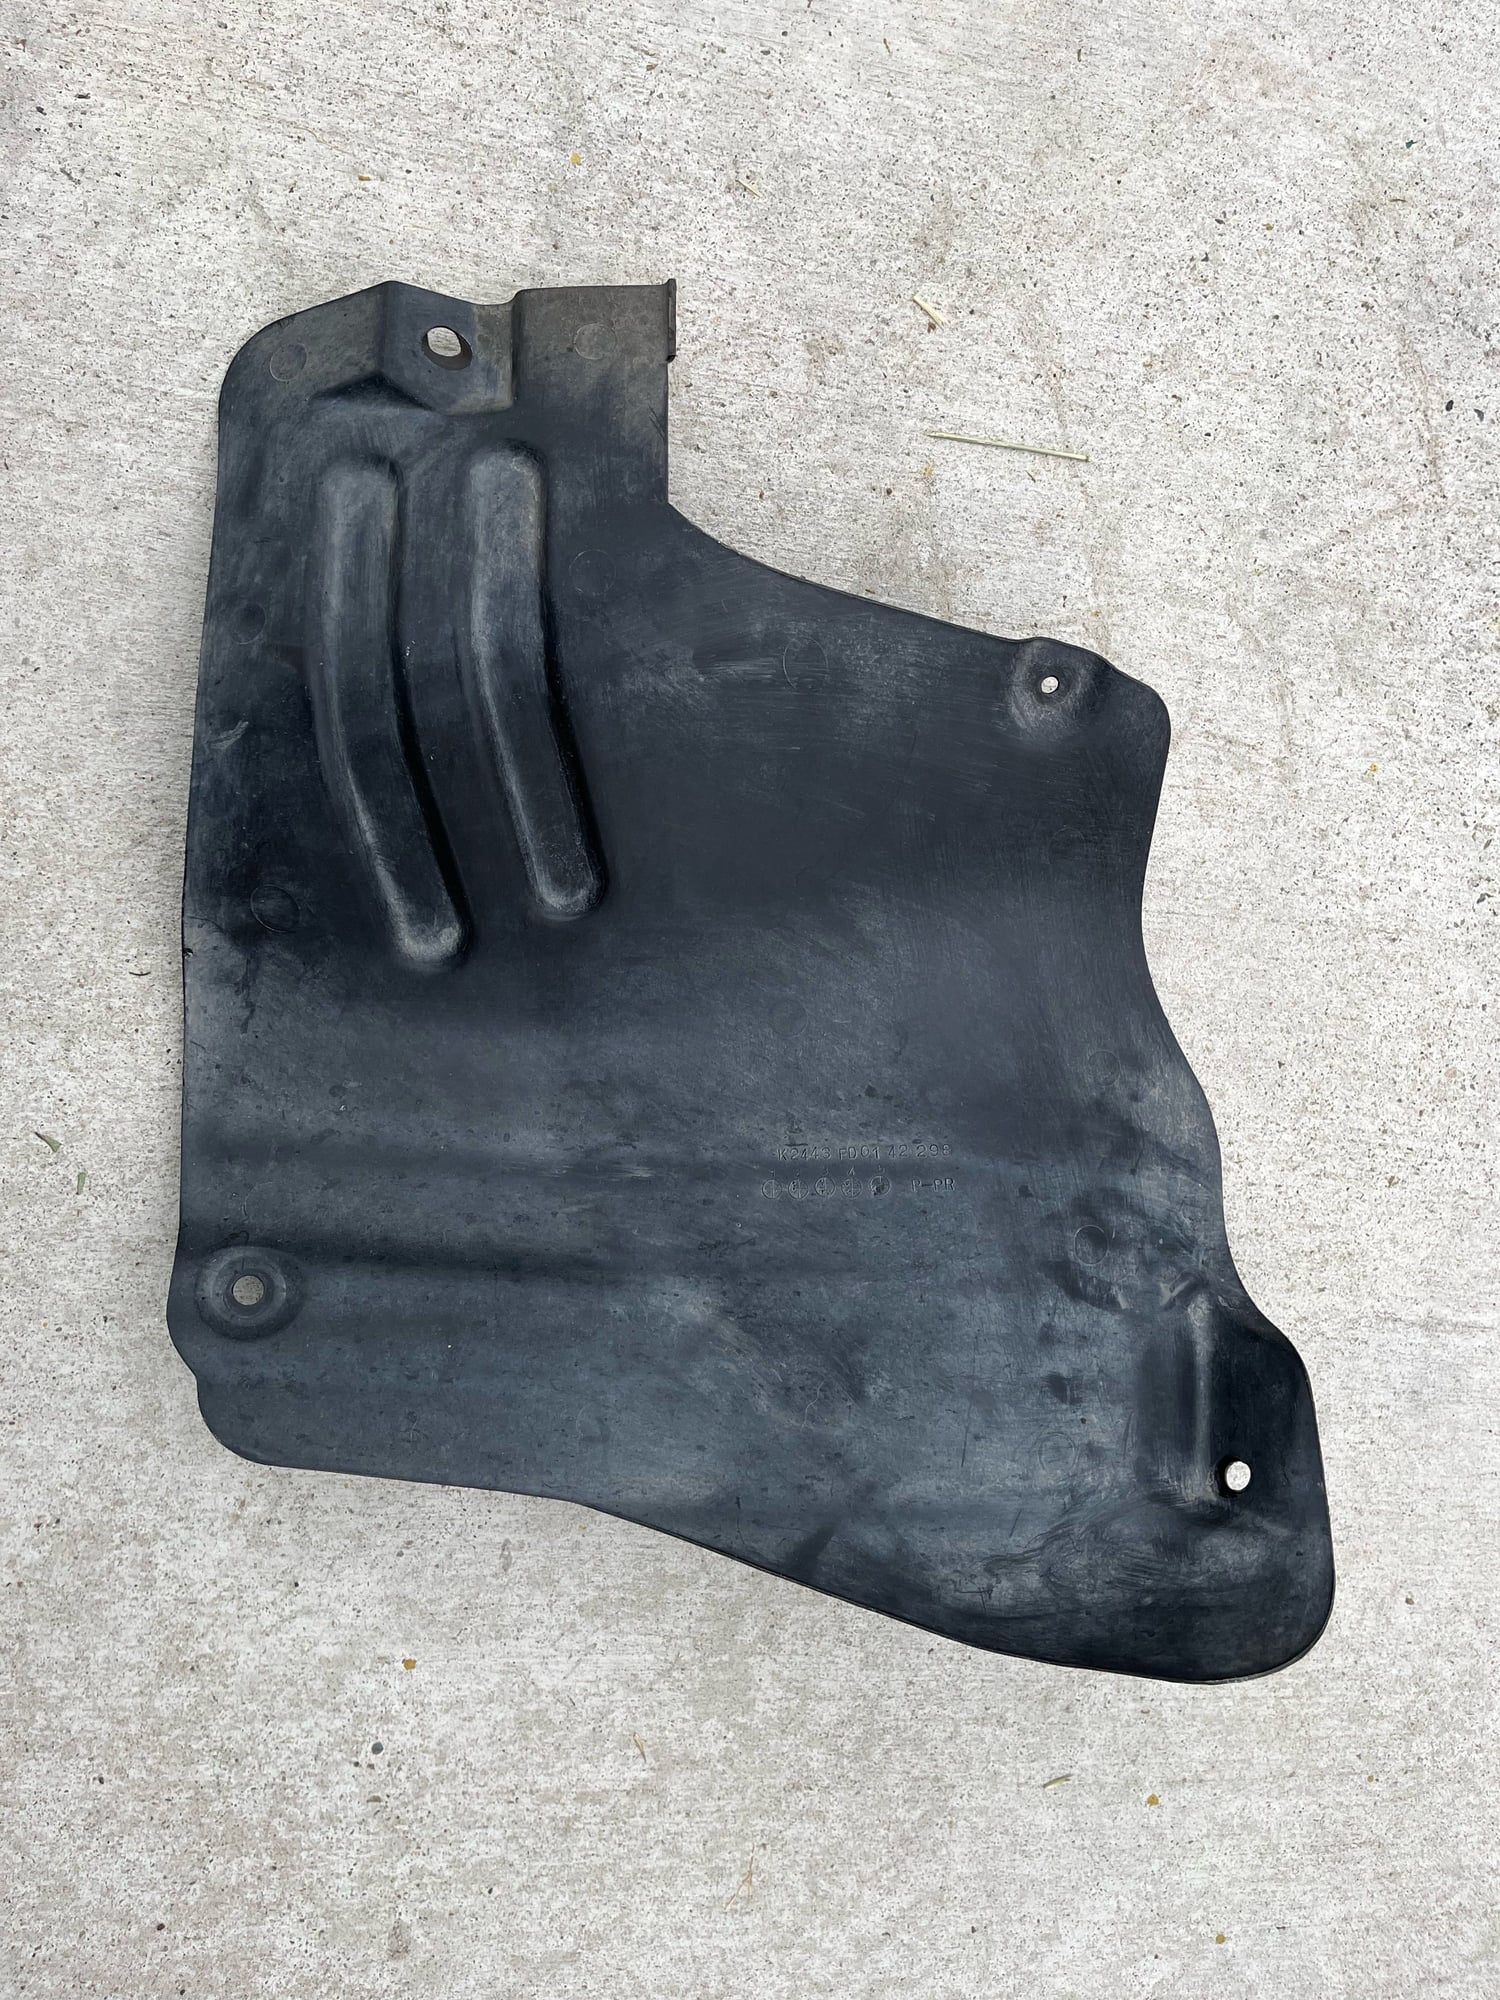 Exterior Body Parts - Fuel Tank Protector - Used - 1992 to 2002 Mazda RX-7 - San Marcos, CA 92069, United States